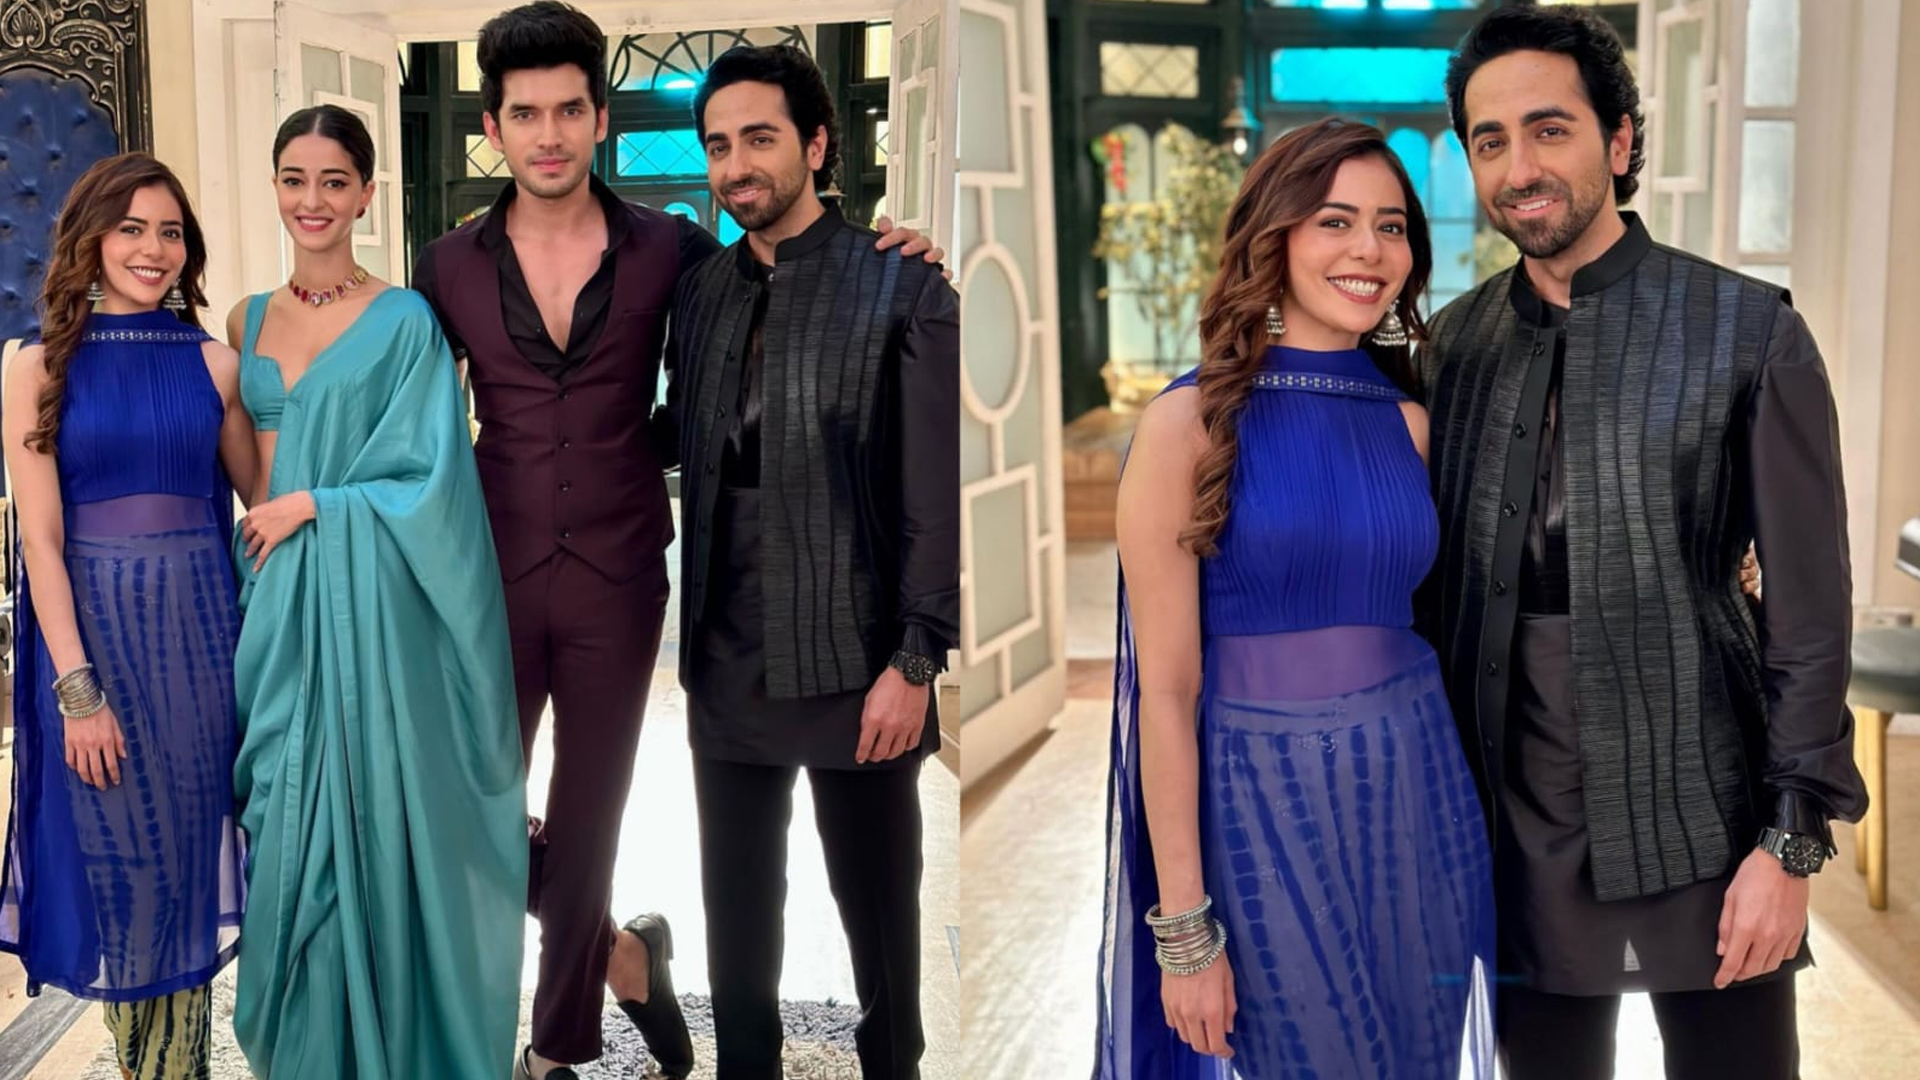 “Shooting with Ayushmann and Ananya was an experience filled with joy and inspiration,” mentions Kundali Bhagya’s Sana Sayyad